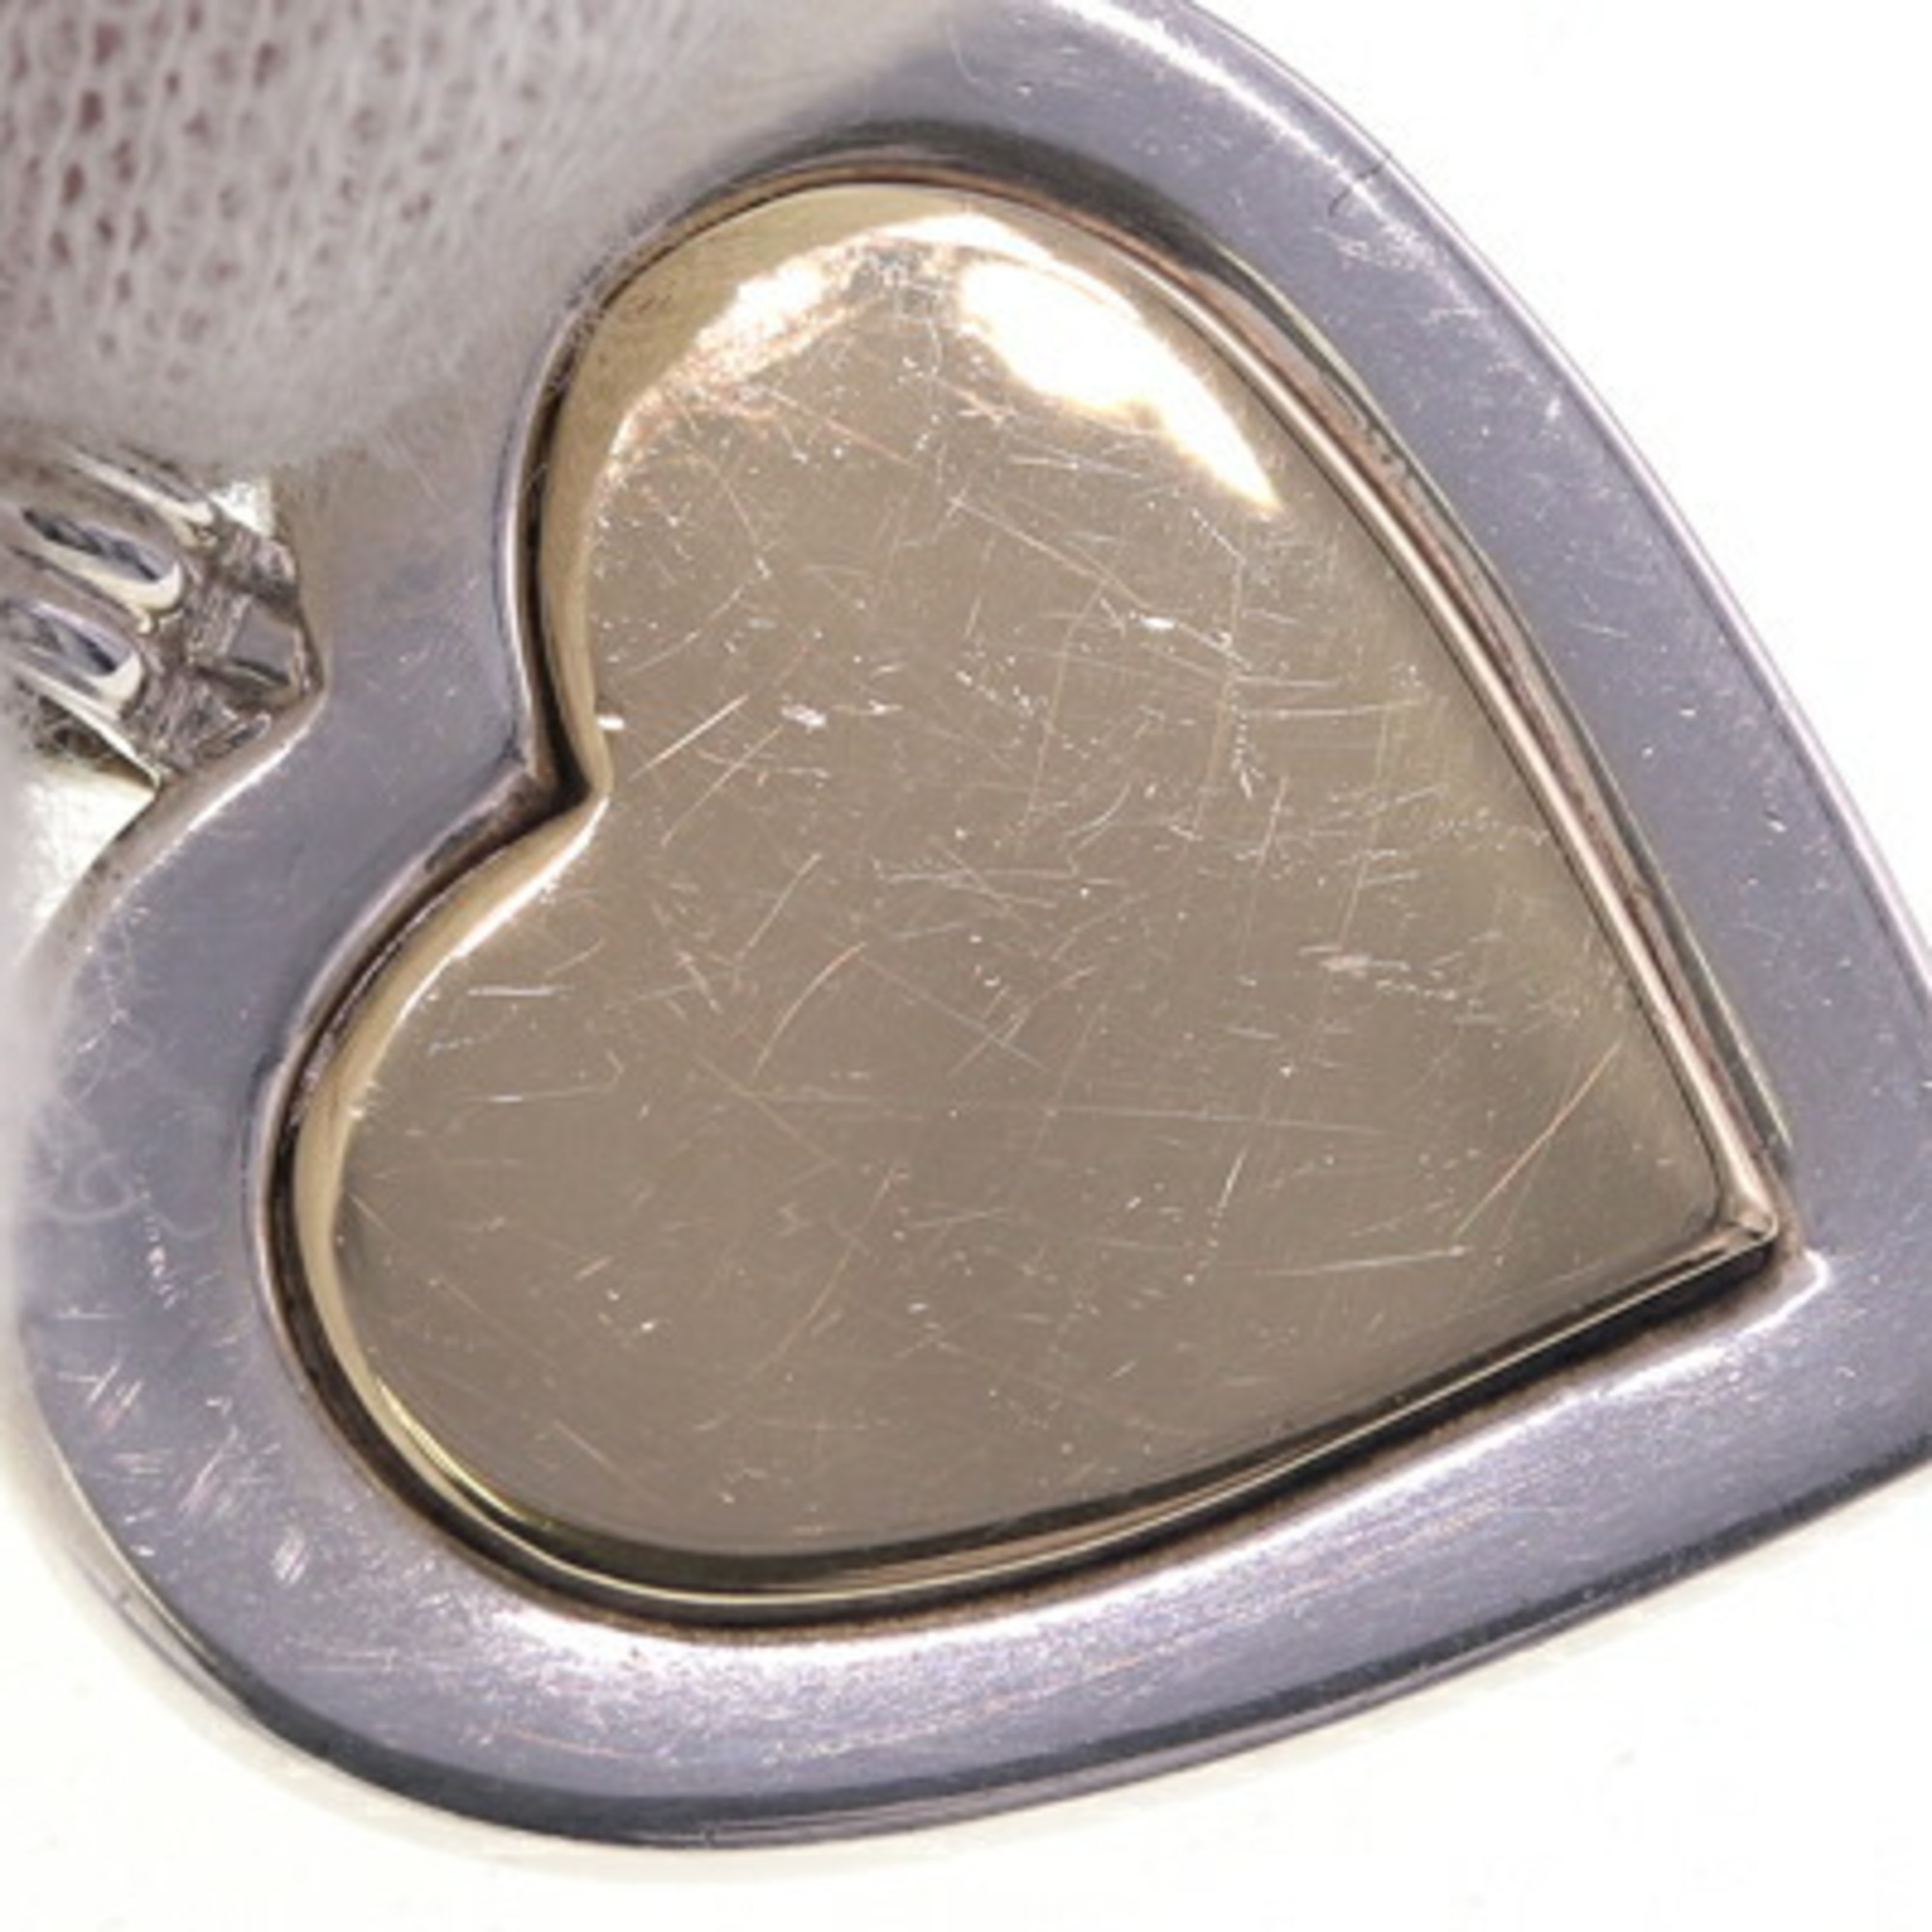 Tiffany Pendant Top Heart Motif Silver Gold YG Yellow SV Sterling 925 Necklace Women's TIFFANY & CO